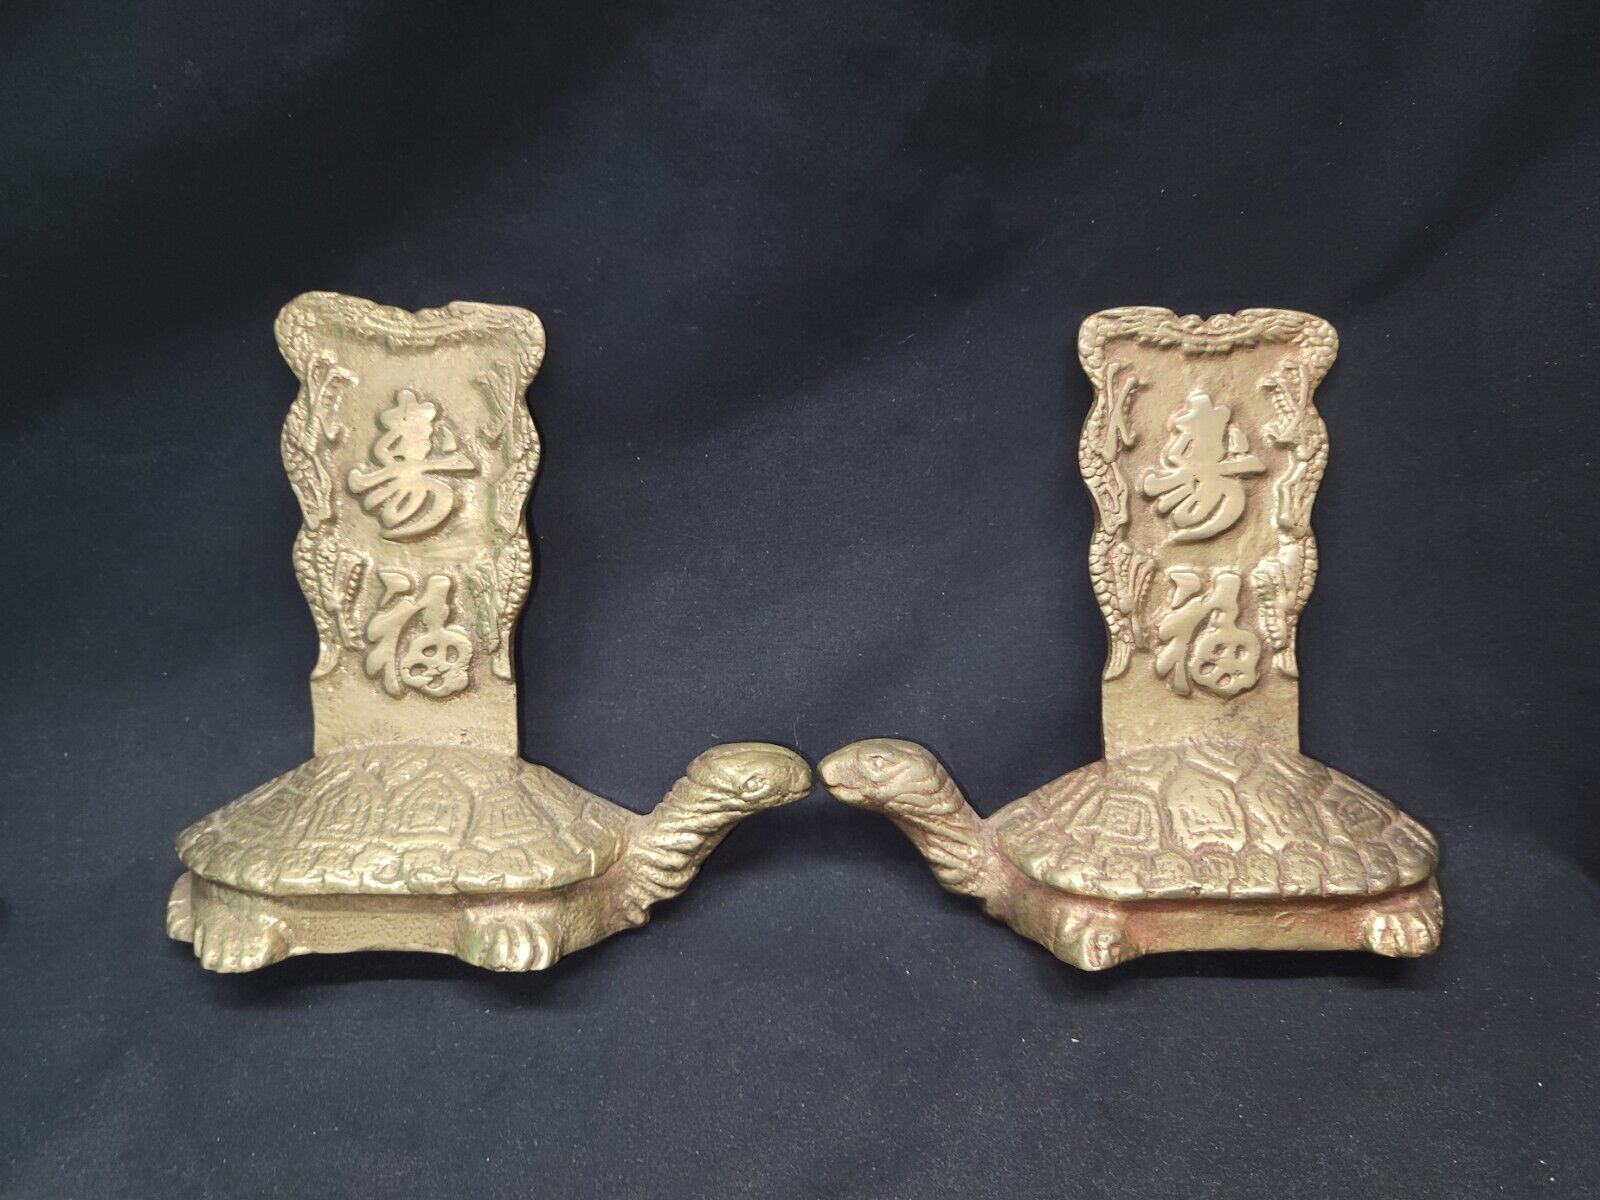 Brass turtle bookends Asian decor 1950s made in Korea #5327